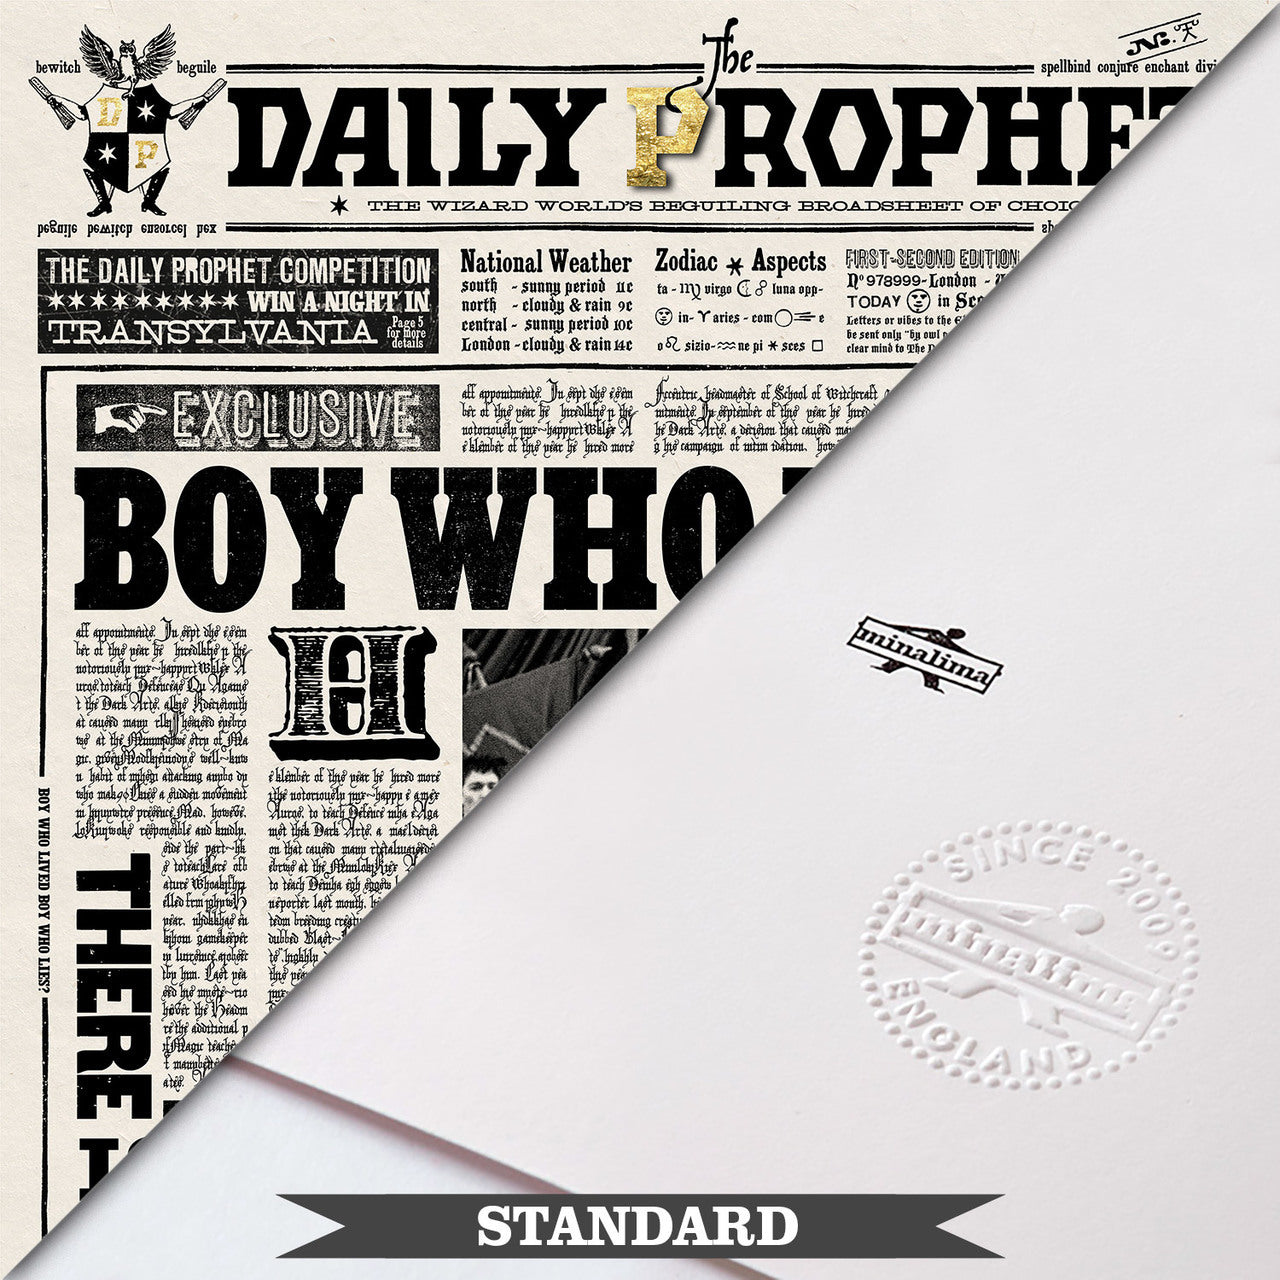 The Daily Prophet - Boy Who Lived Limited Edition Art Print